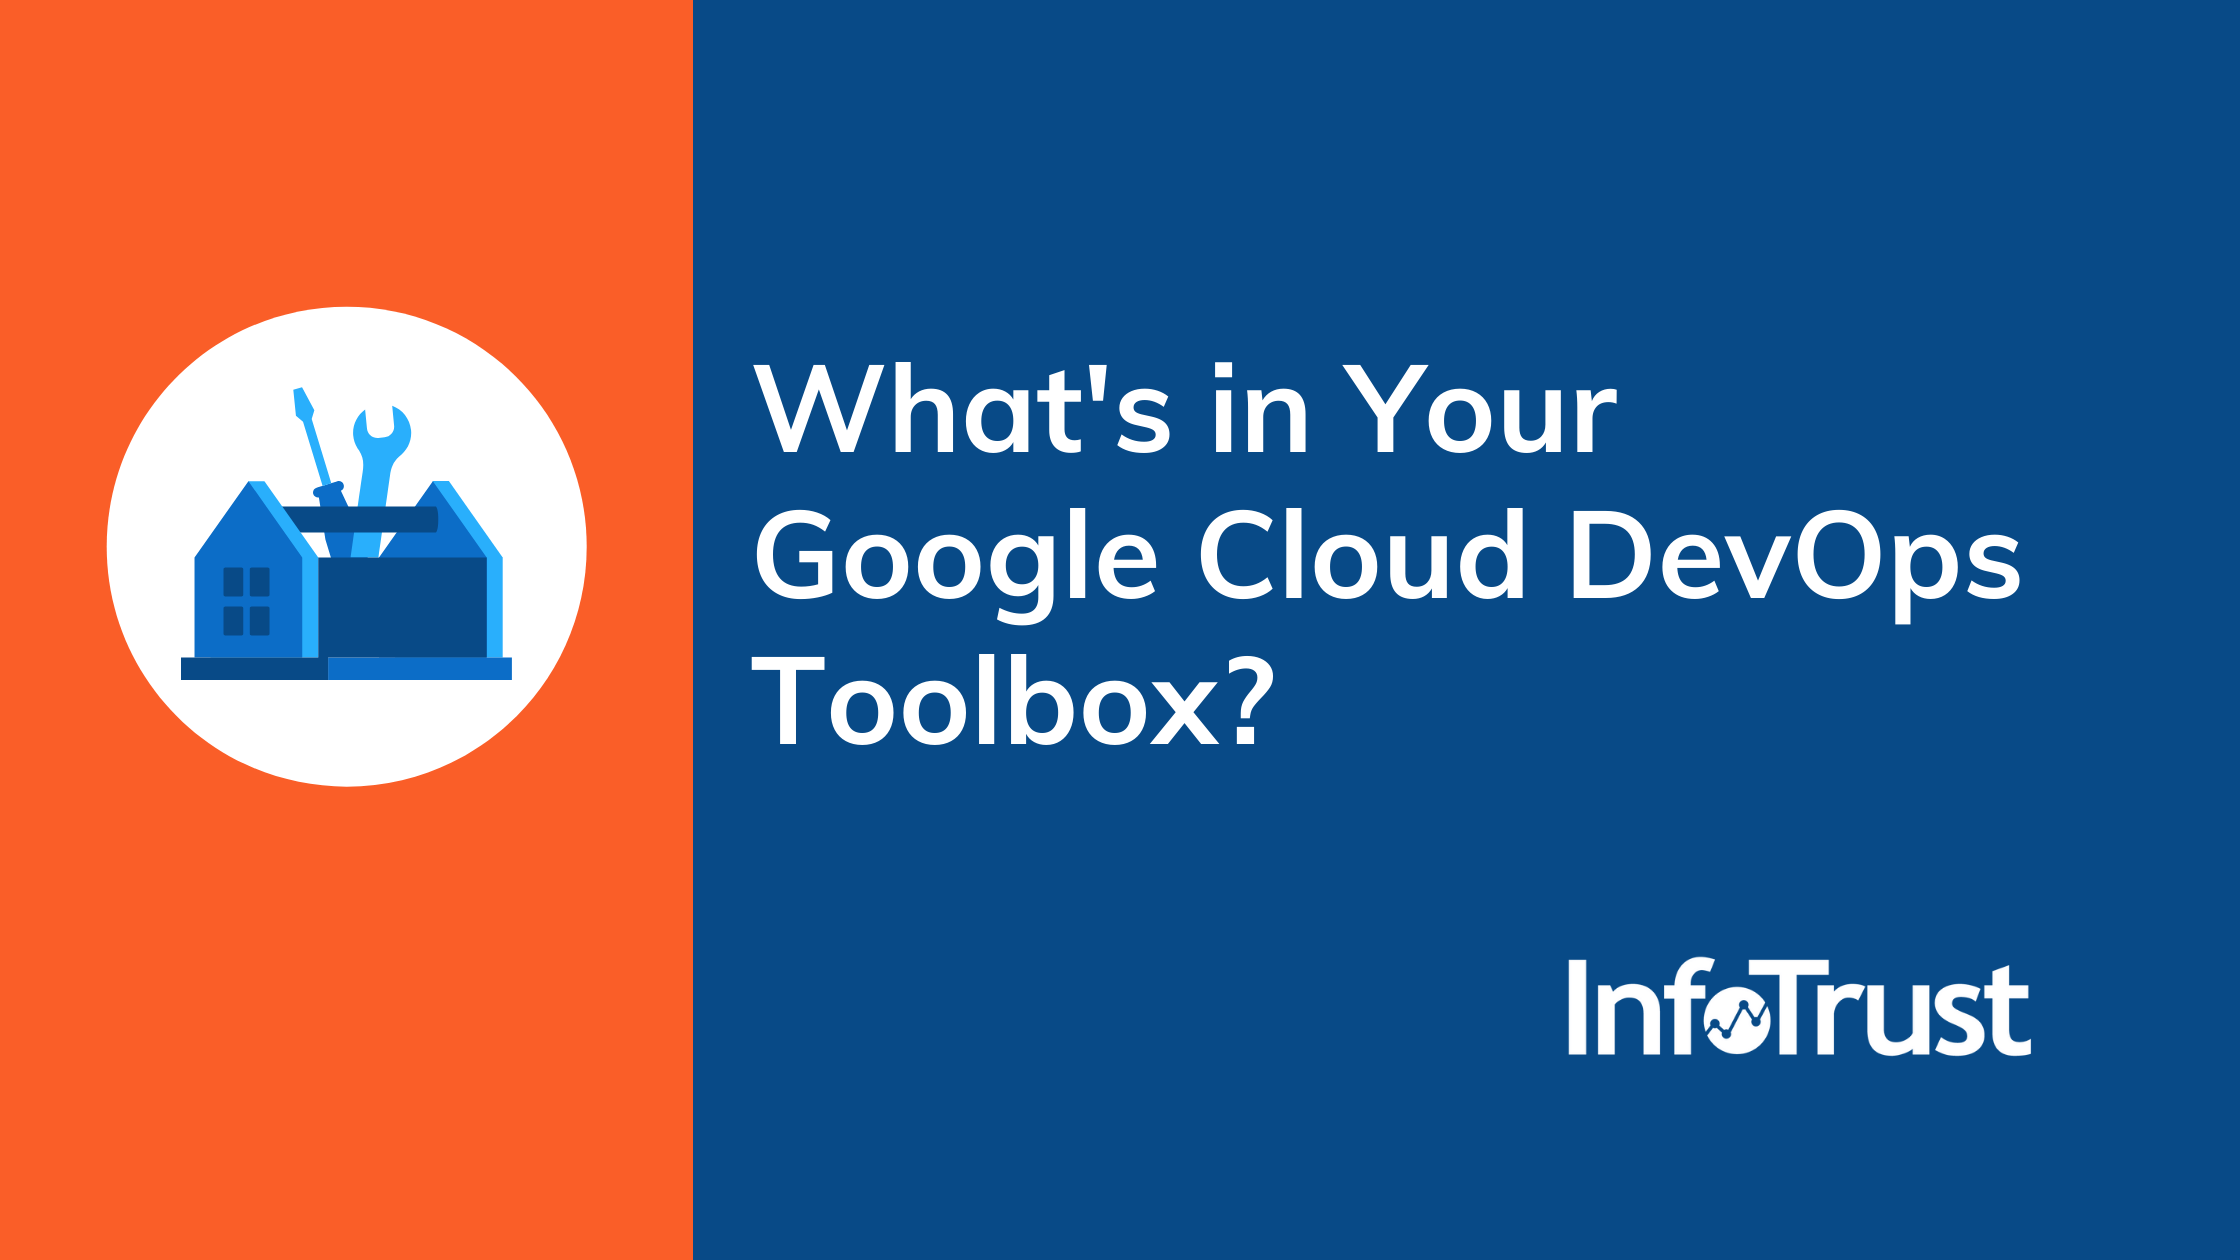 What's in Your Google Cloud DevOps Toolbox?